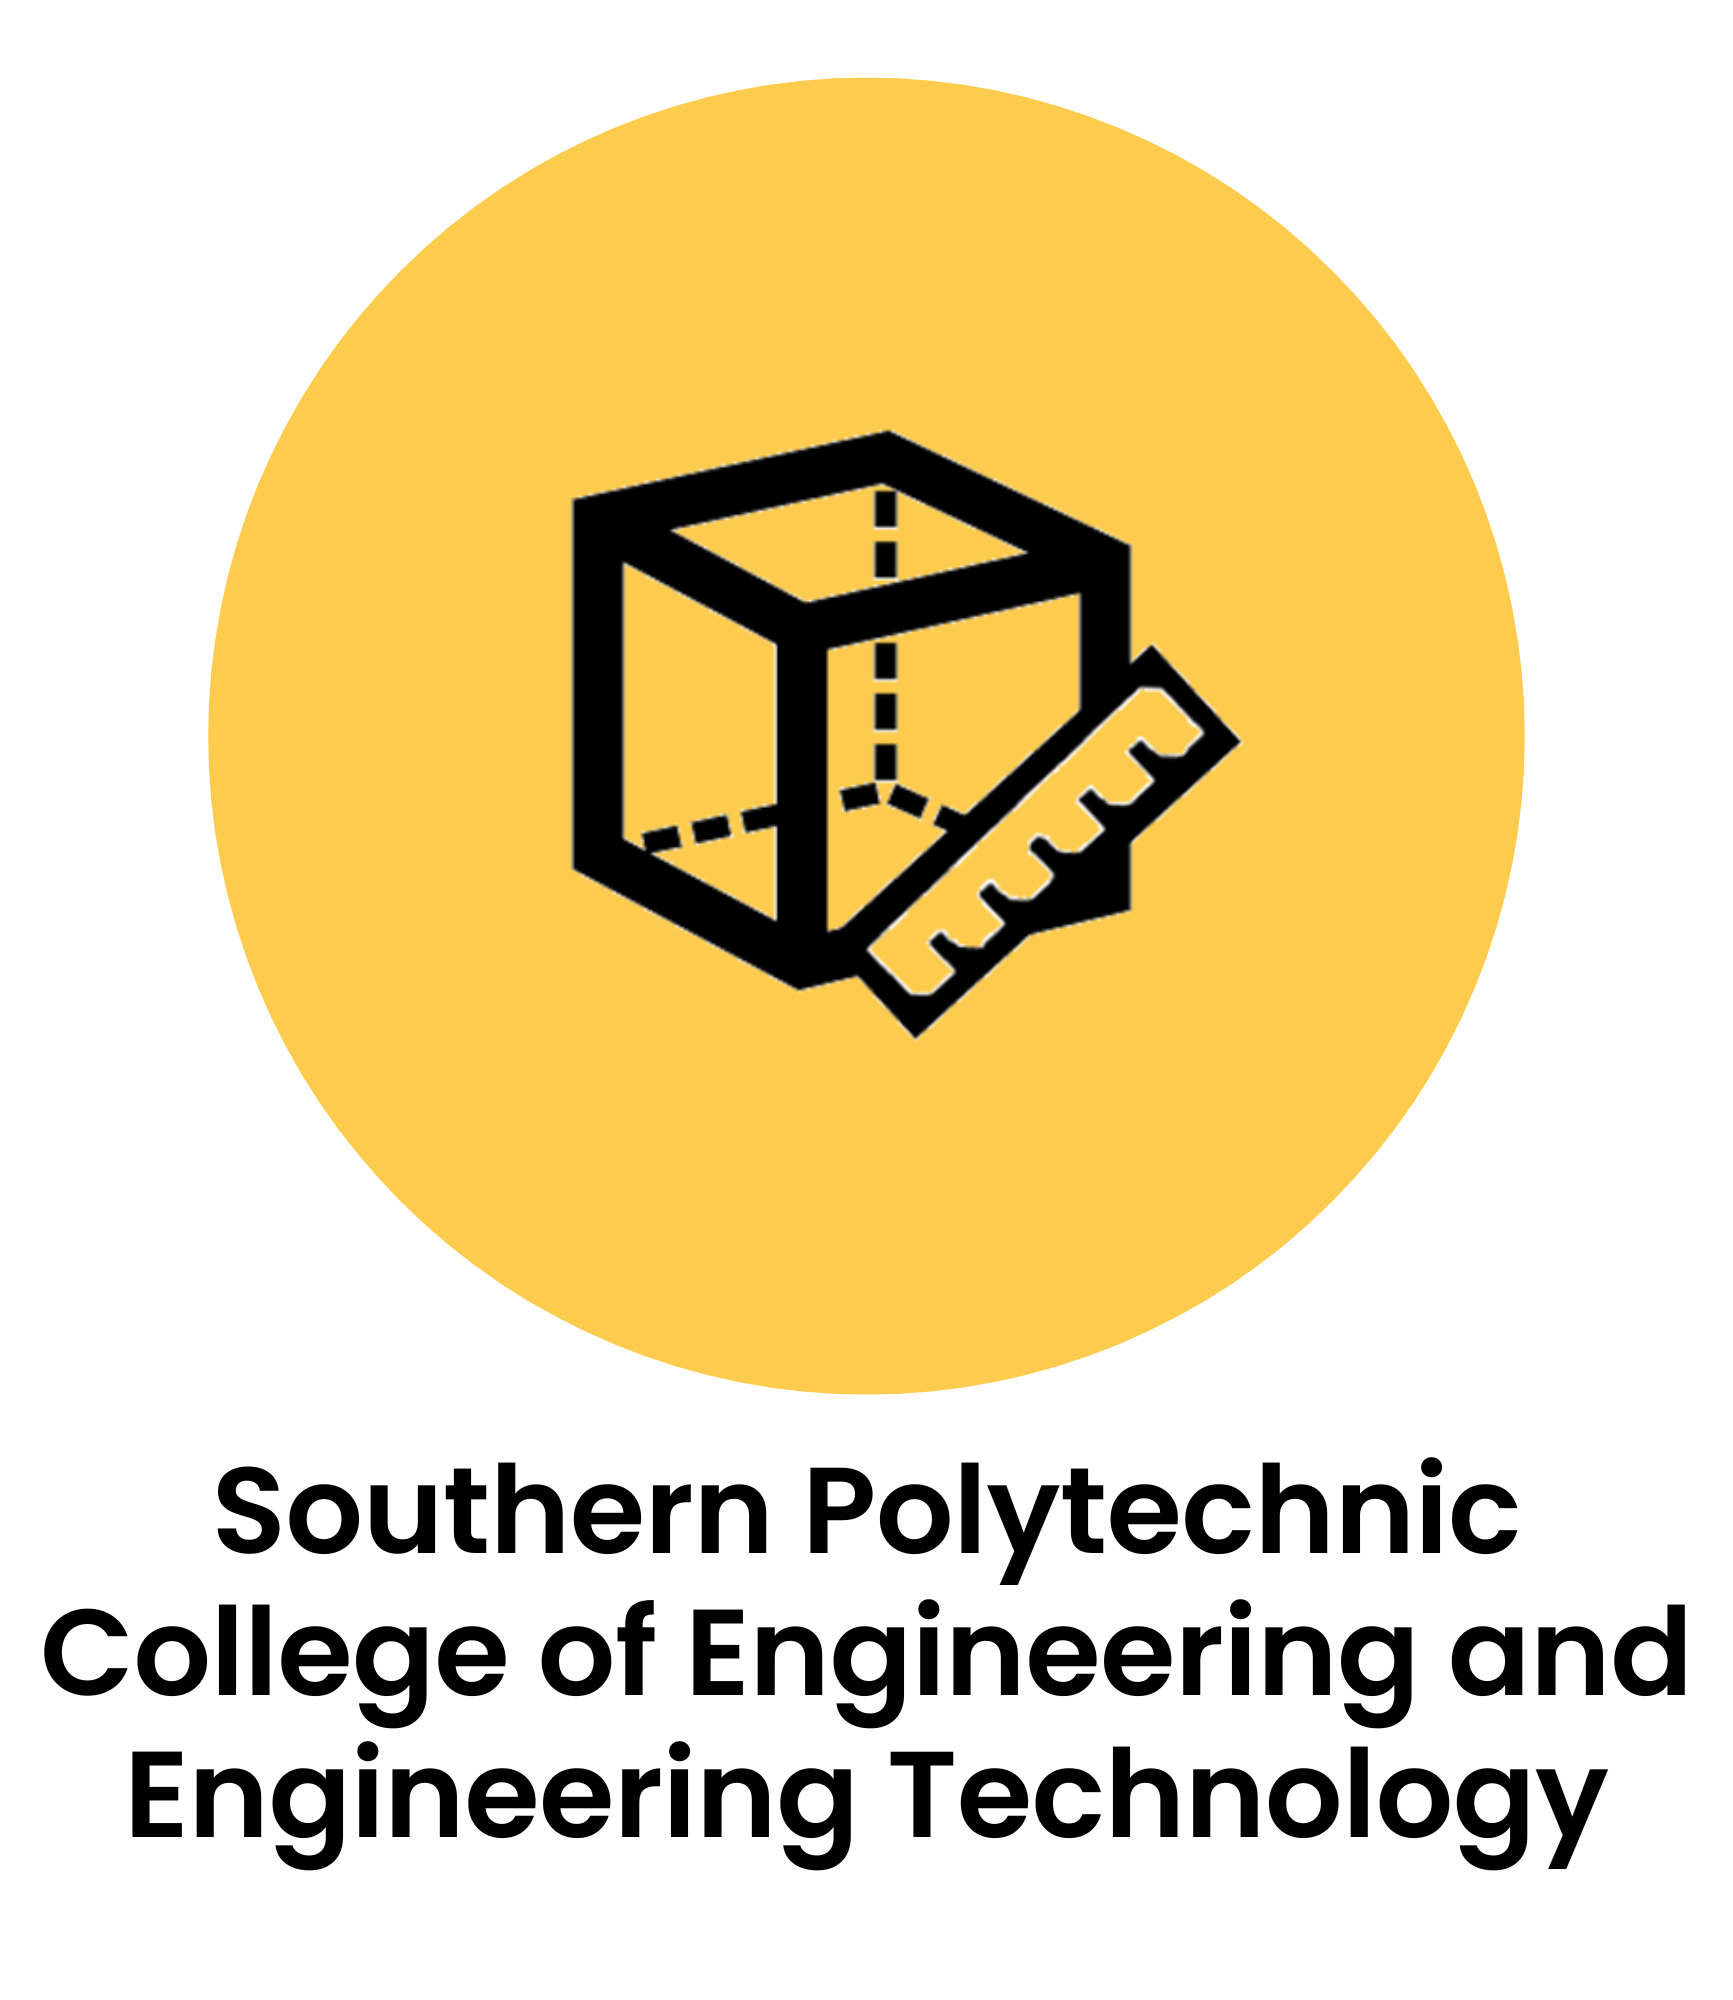 [text] Southern Polytechnic College of Engineering and Engineering Technology